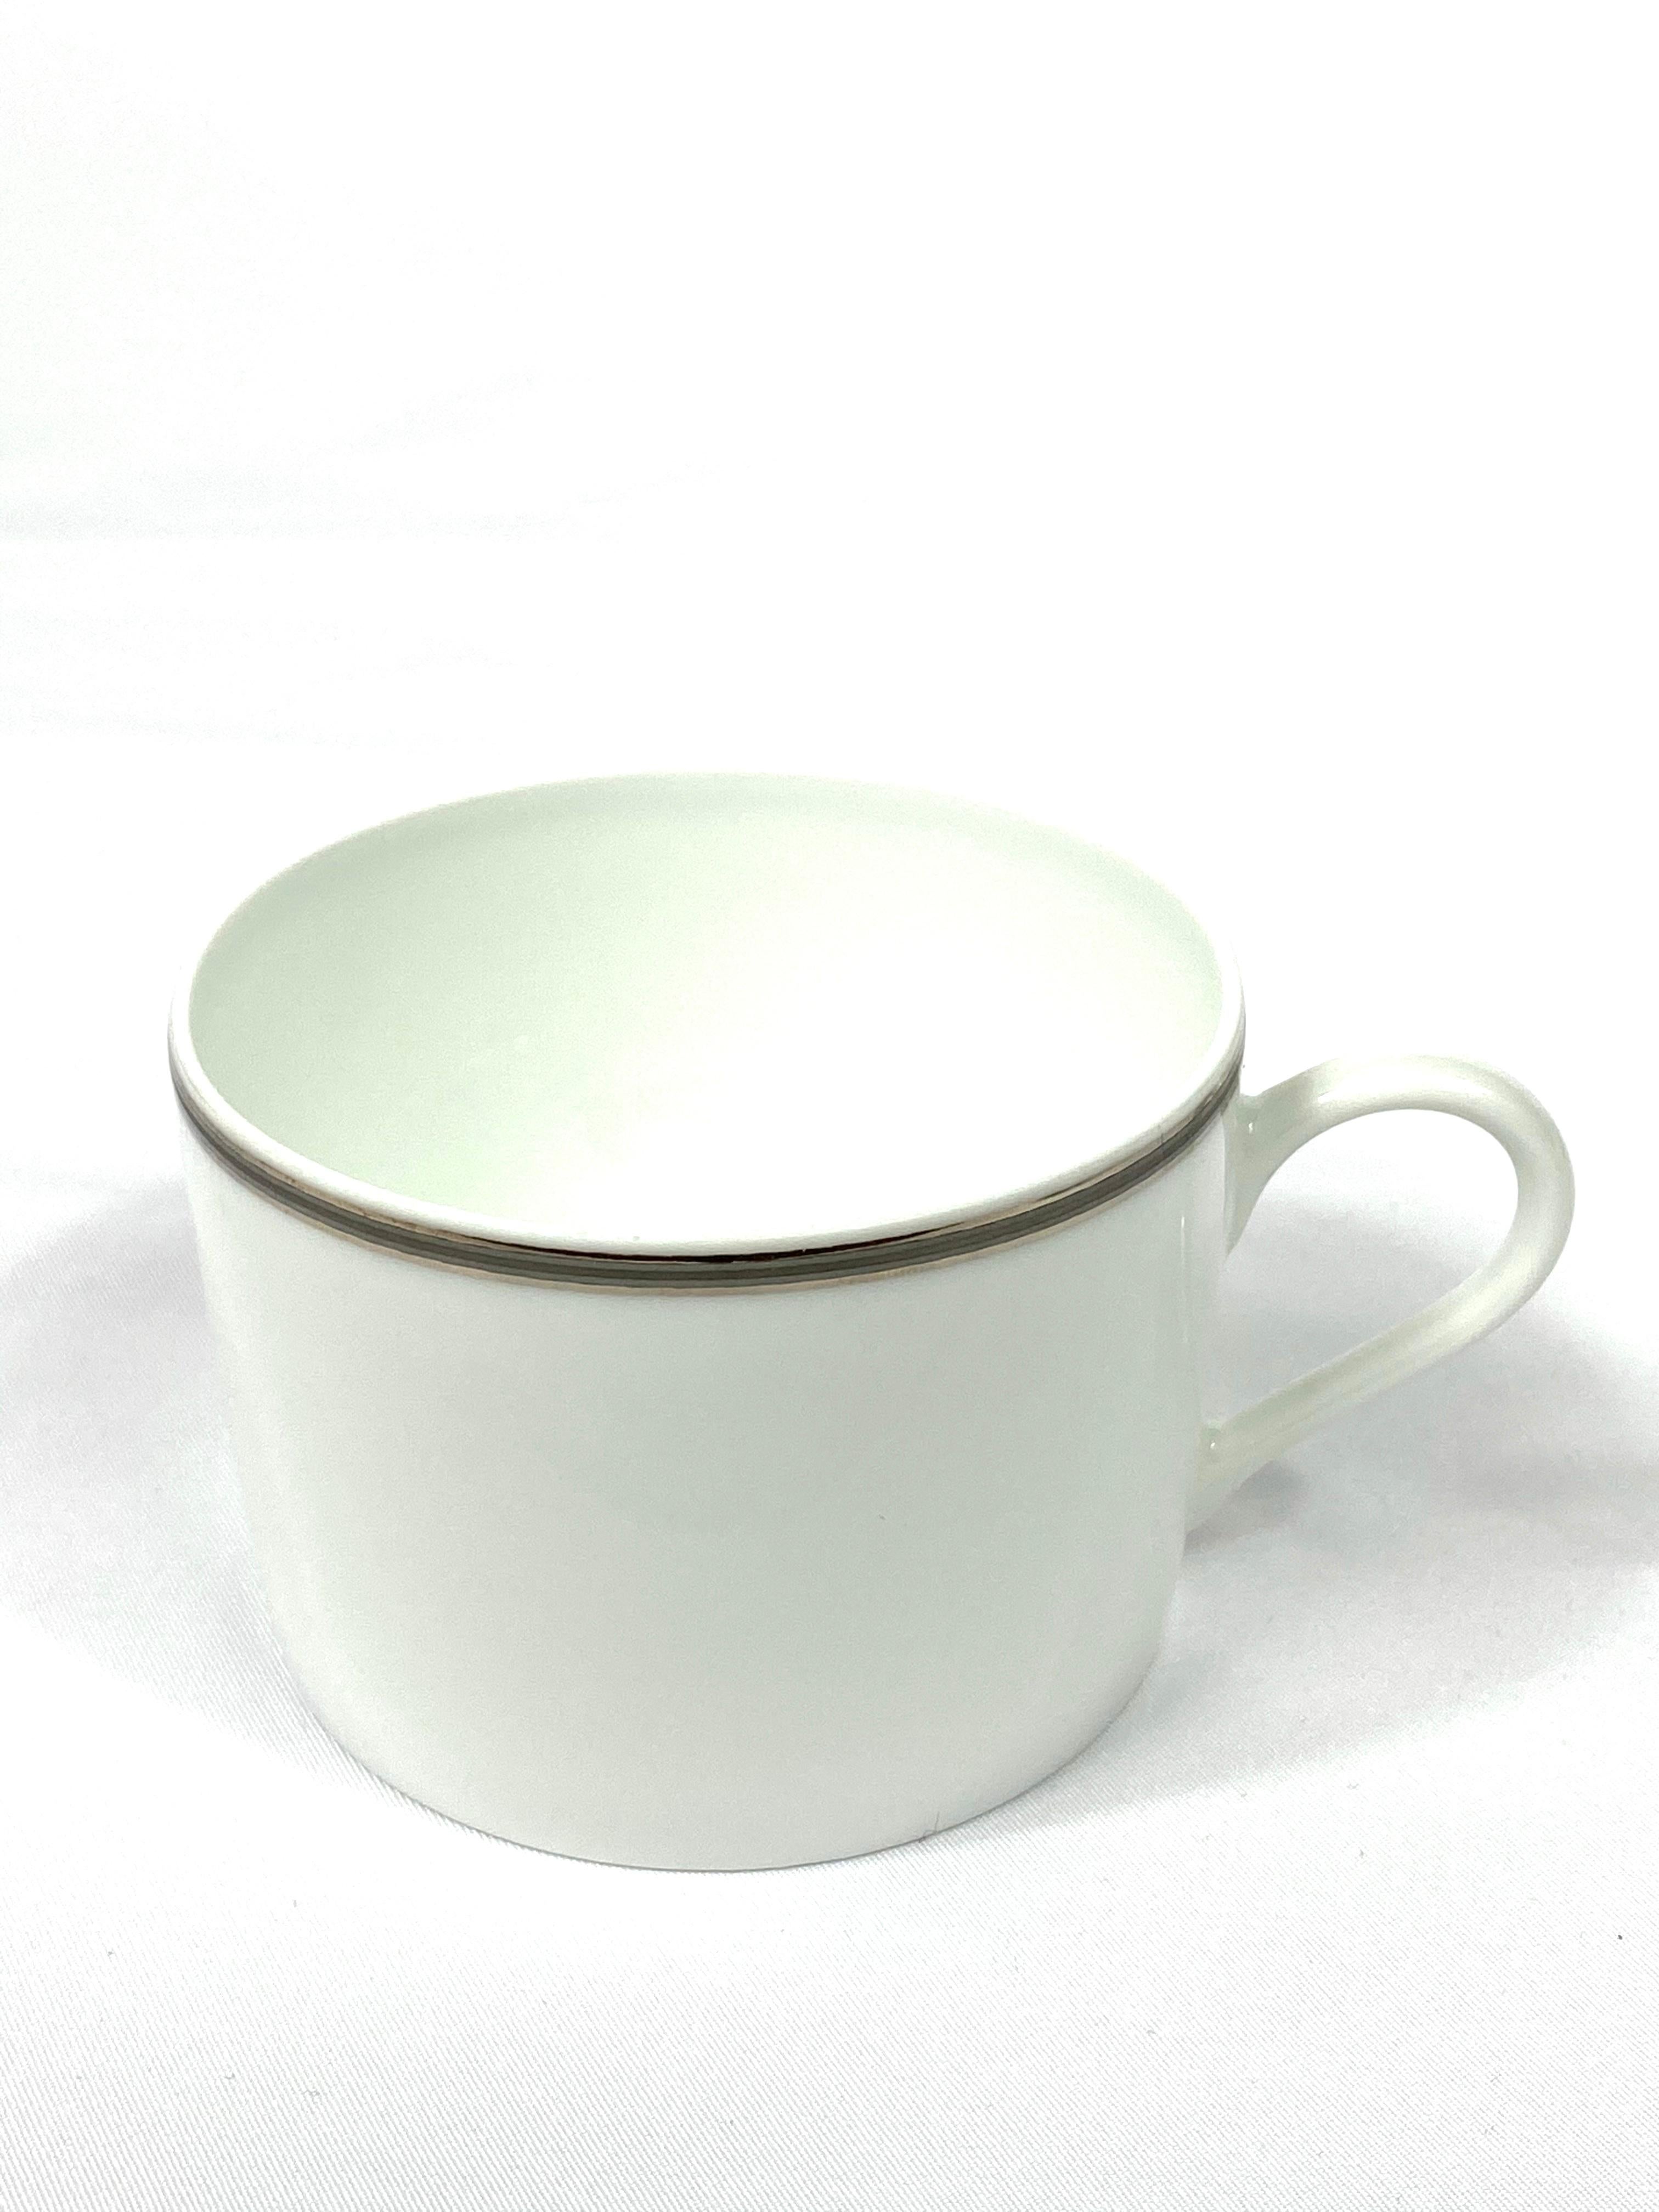 HERMES Porcelain Tea and Dessert Setting Chaine D'Ancre in Grey Set of 6 8